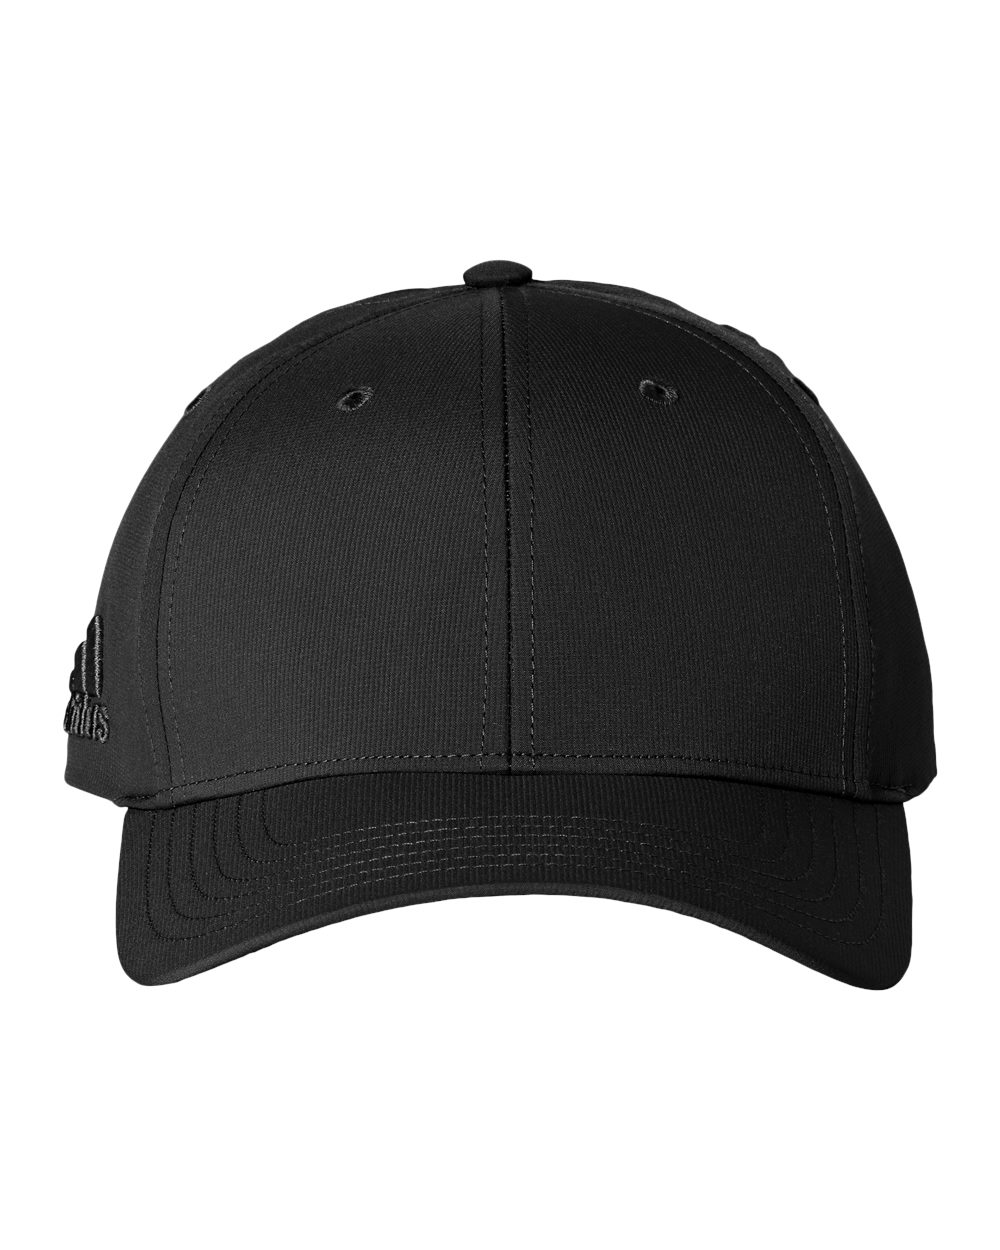 Poly Textured Performance Cap - A600PC